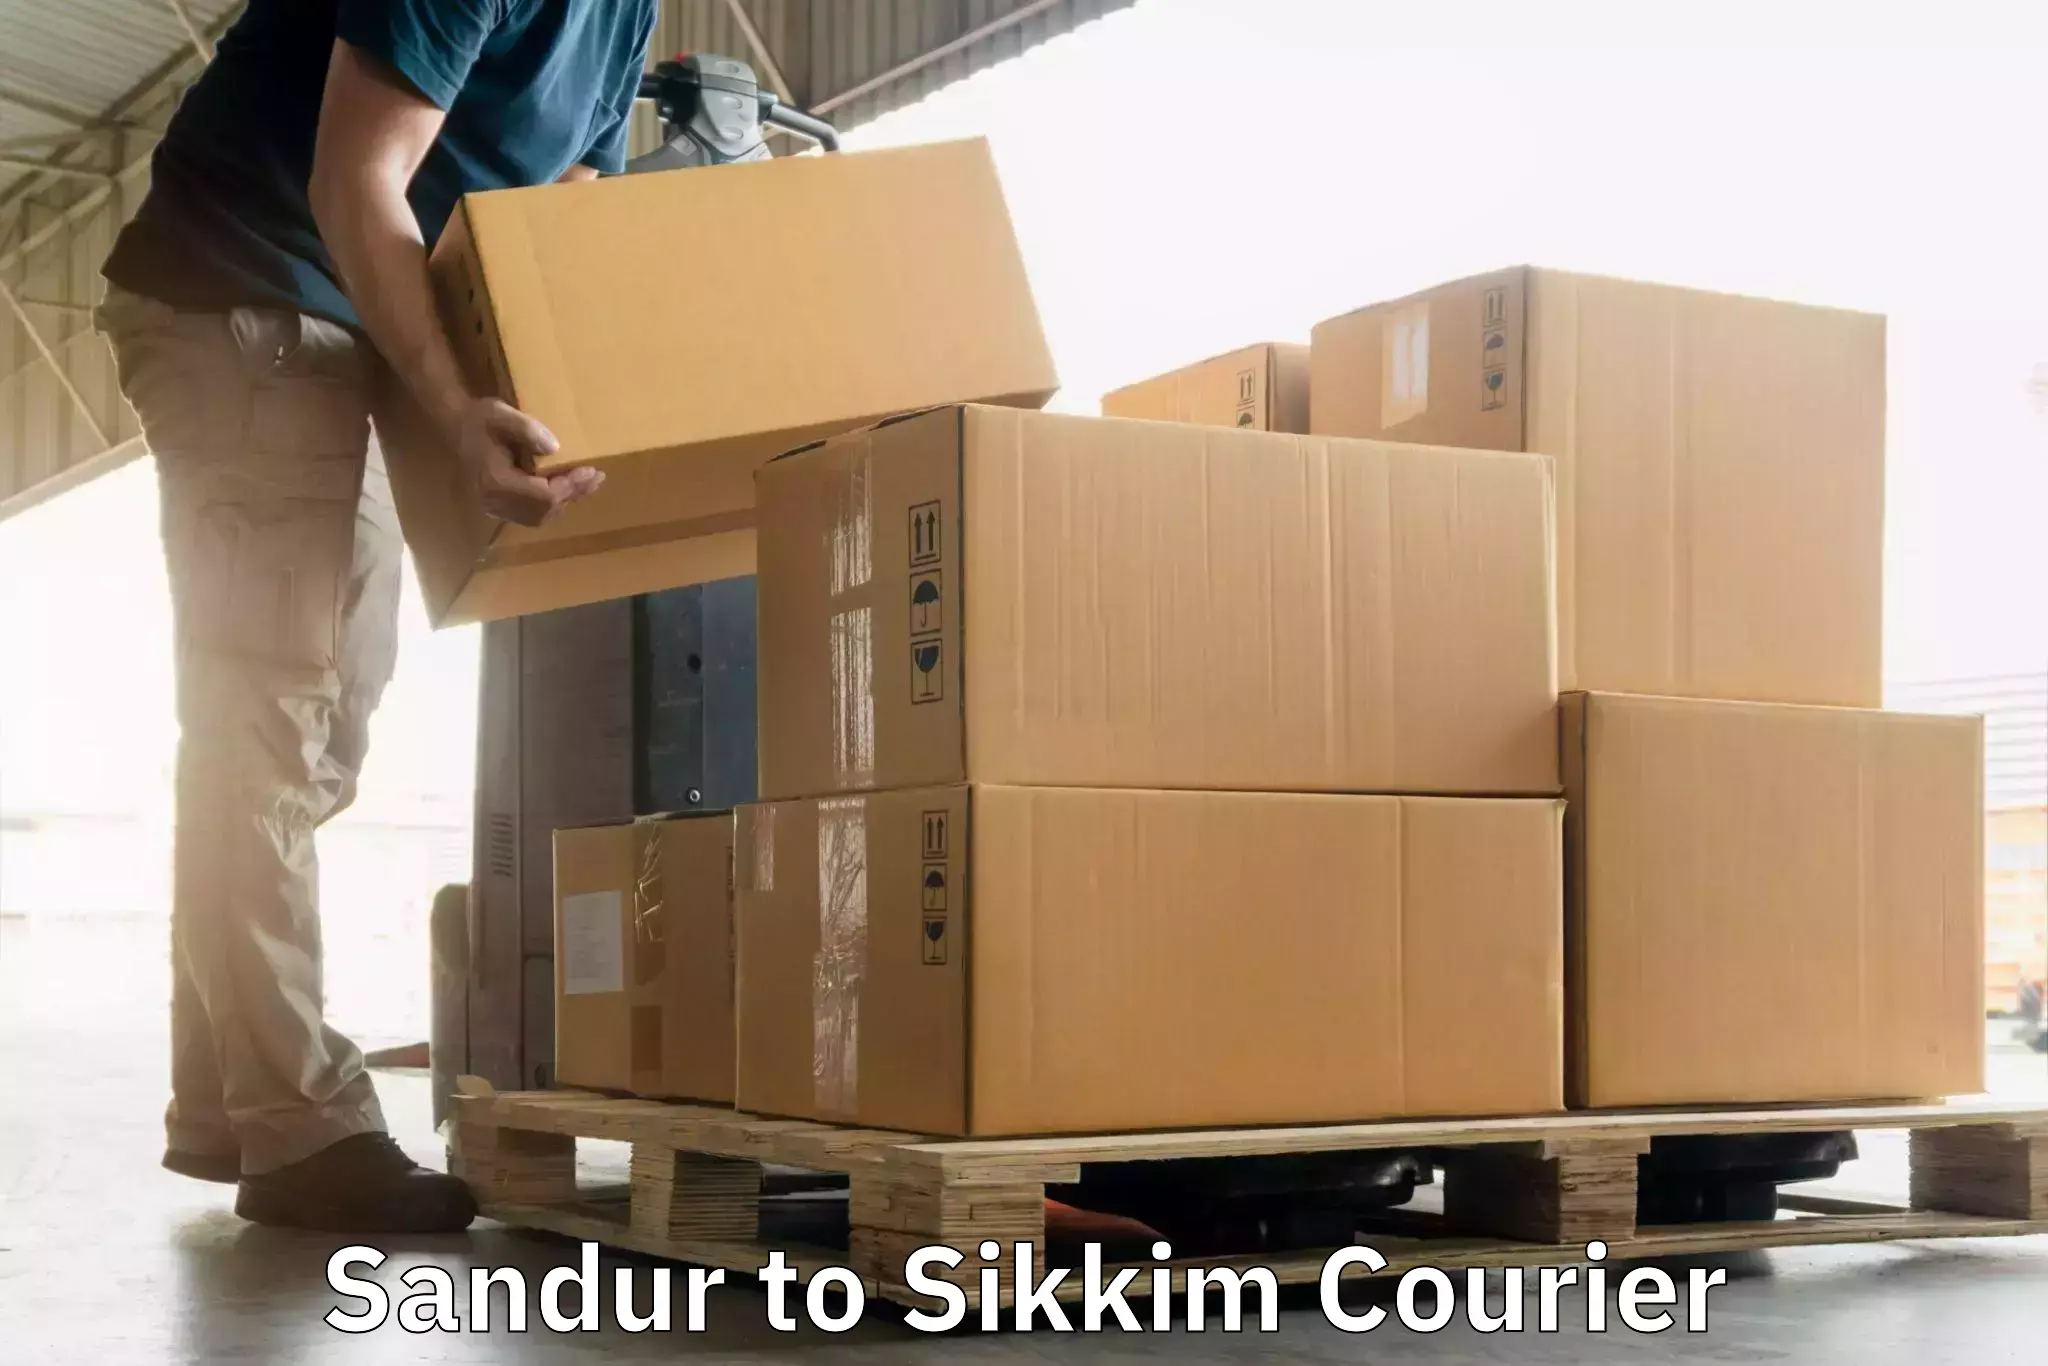 Express package services Sandur to East Sikkim